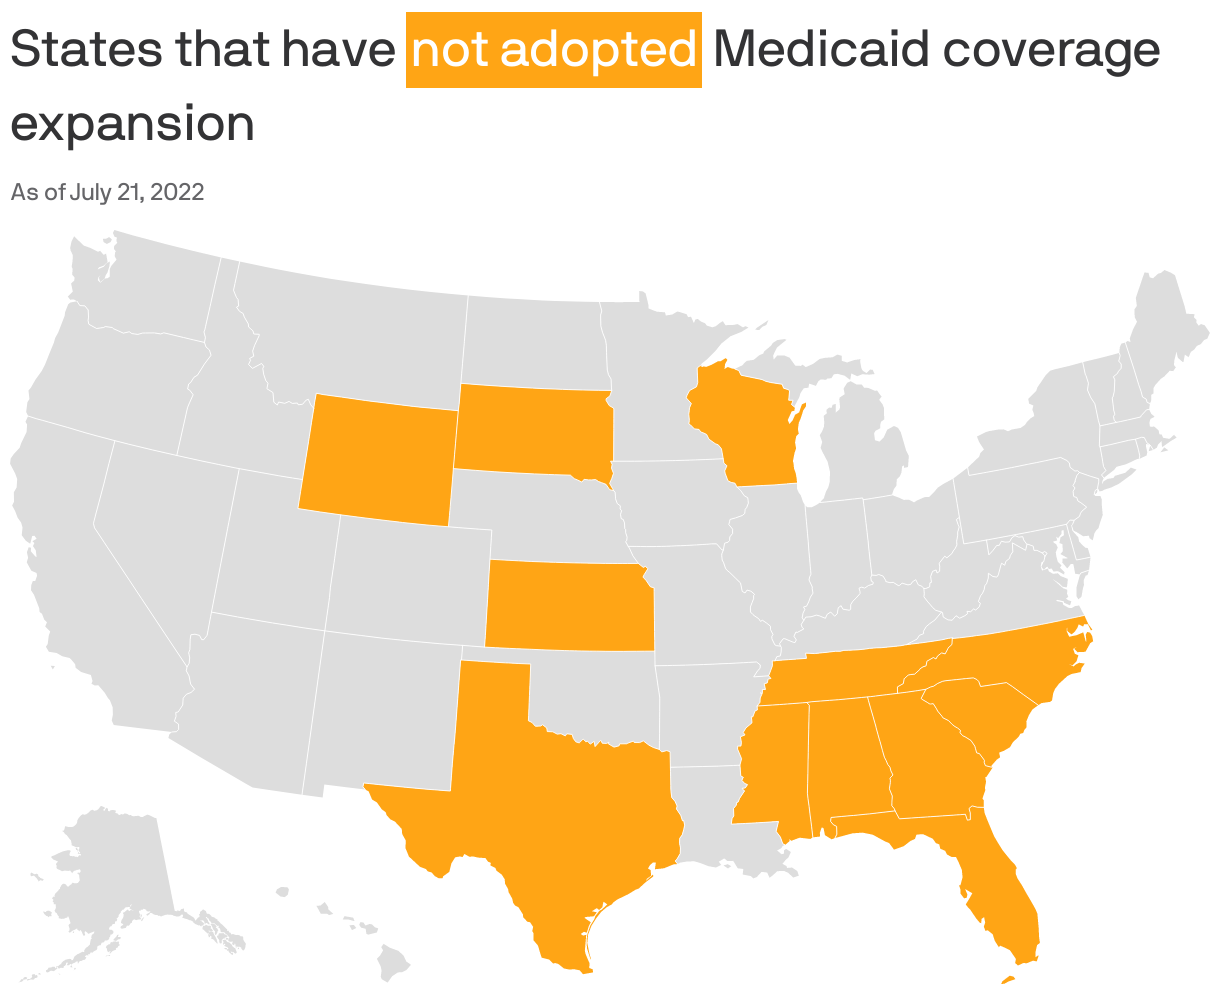 States that have <span style="display: inline-block; margin: 1px 0px; background: #ffa515; padding: 2px; color: white; white-space: nowrap">not adopted</span> Medicaid coverage expansion